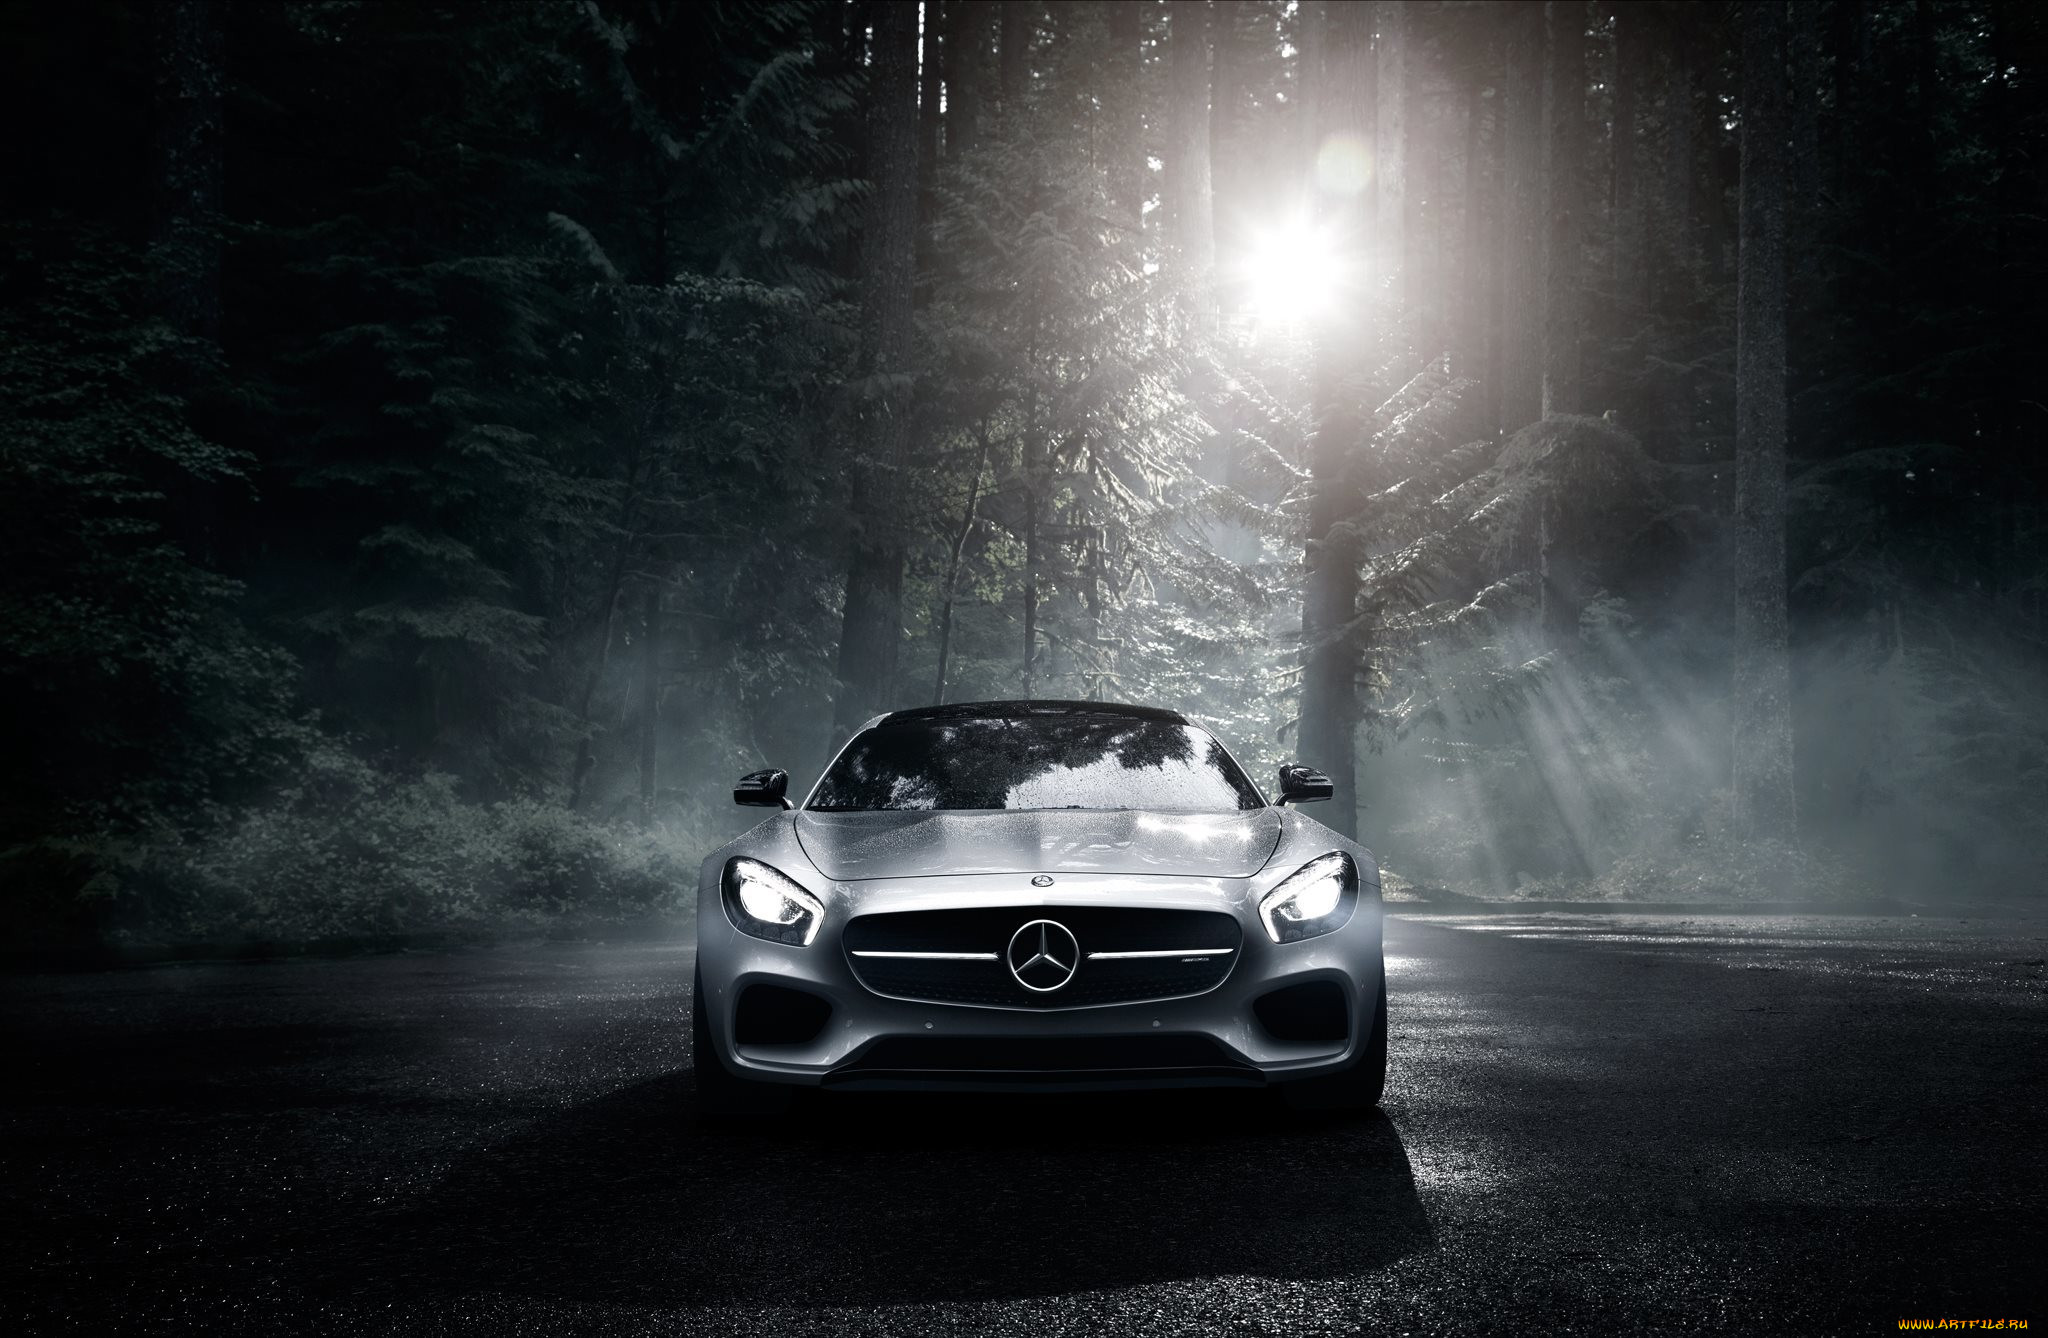 , mercedes-benz, gt, s, color, amg, silver, 2016, sun, dark, forest, front